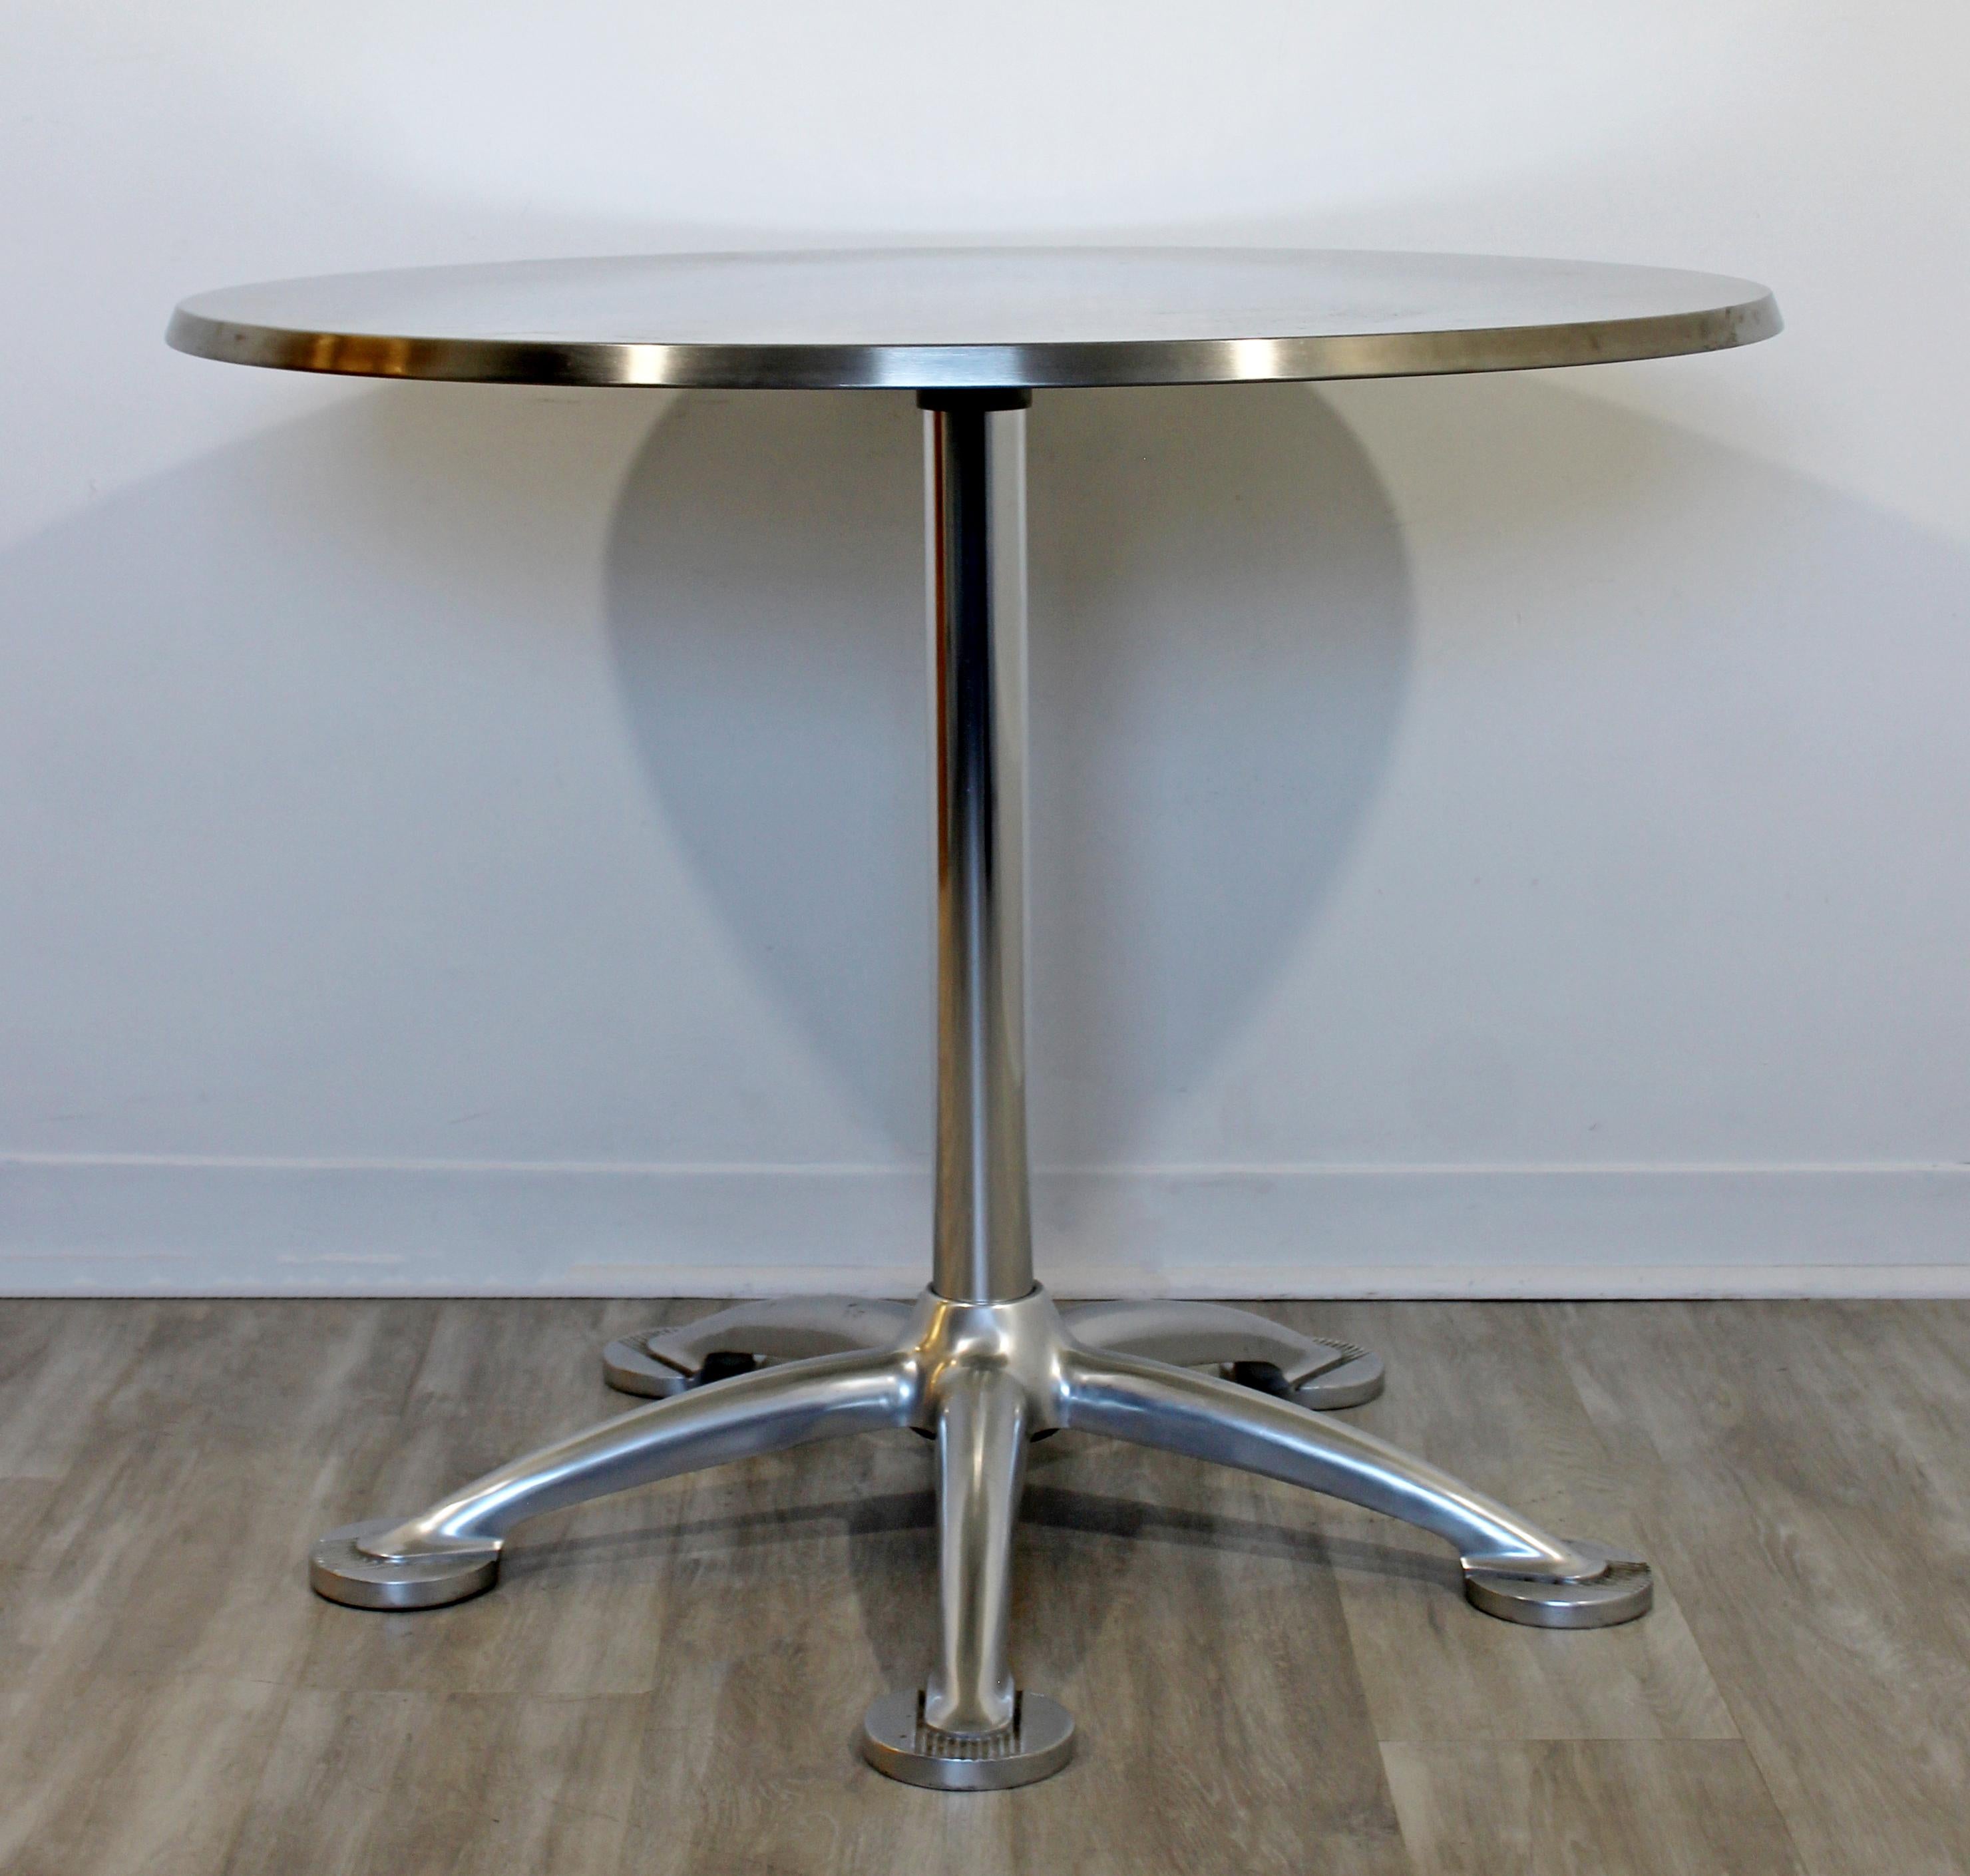 For your consideration is a superb, aluminum, round dinette table, by Jorge Pensi, made in Spain, circa 1980s. In very good vintage condition. The dimensions are 35